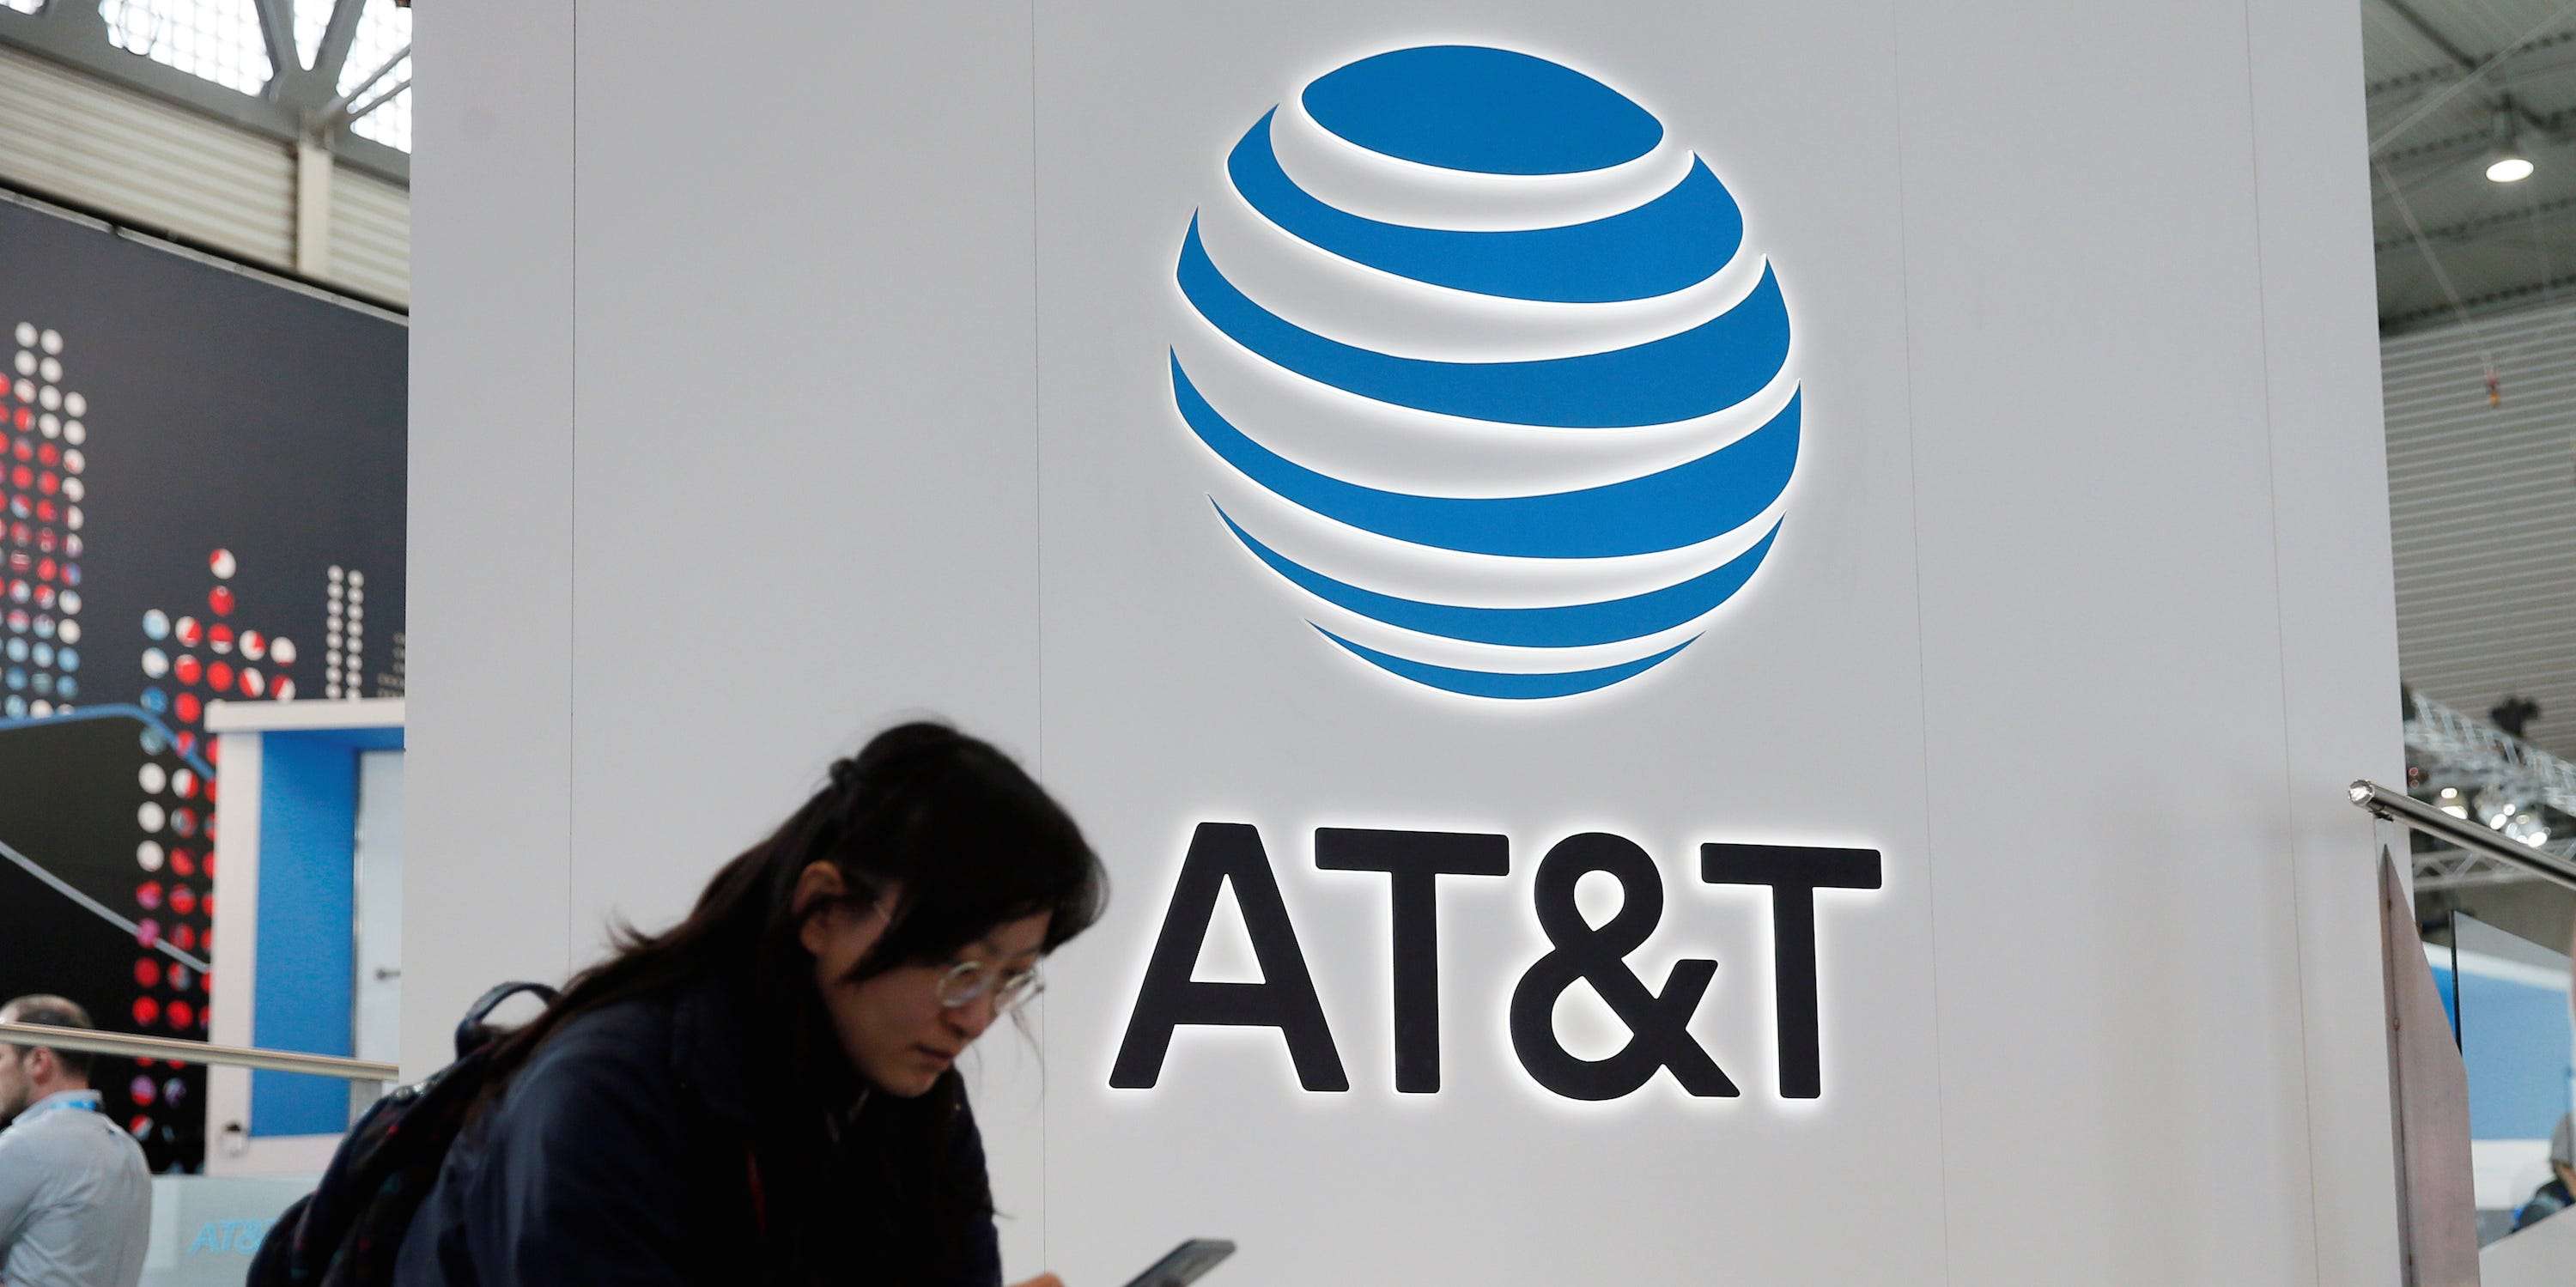 How to unlock an AT&T phone to use with other carriers